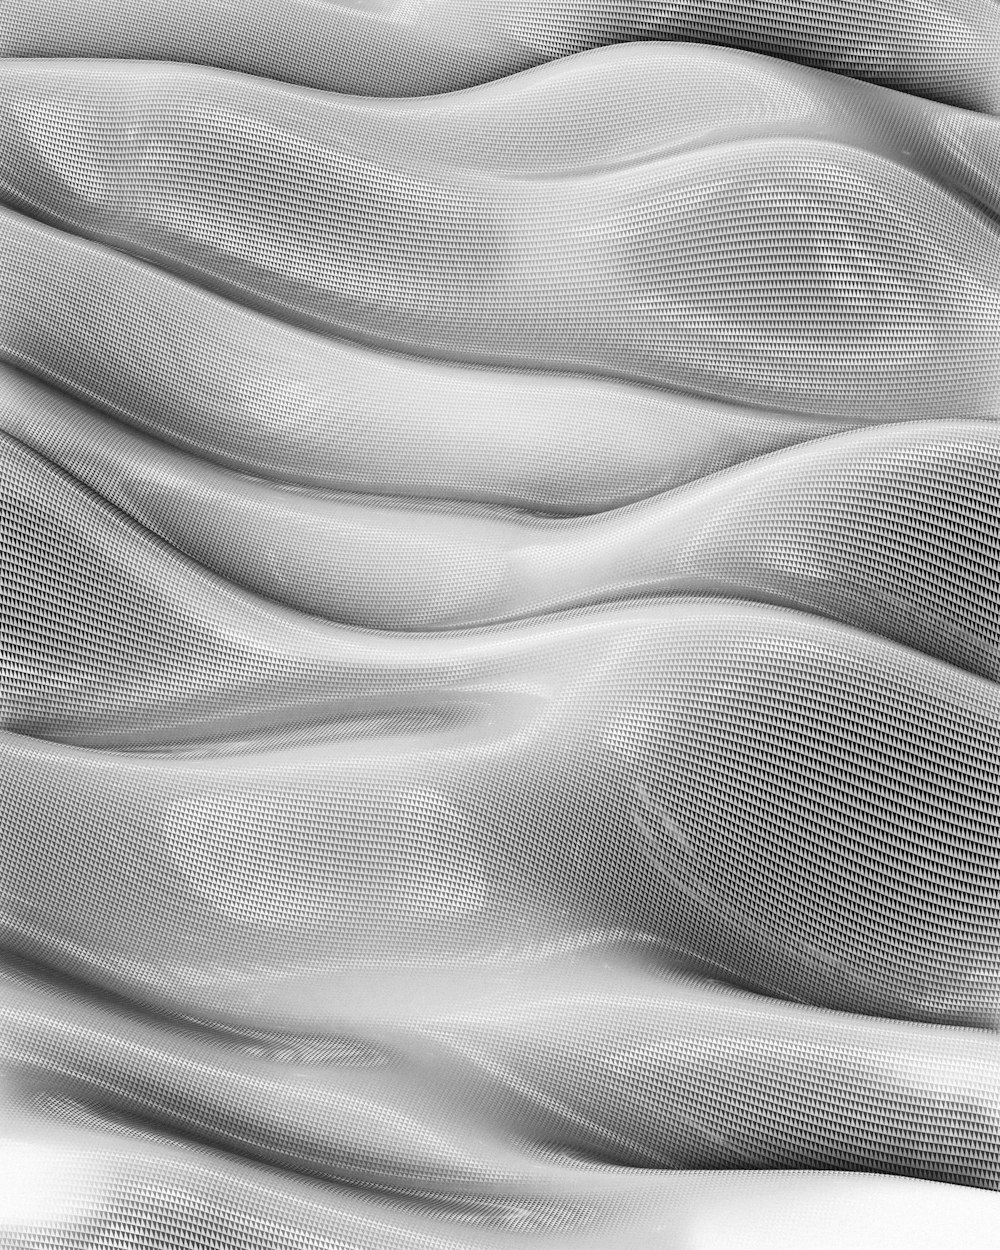 a black and white photo of a wavy surface